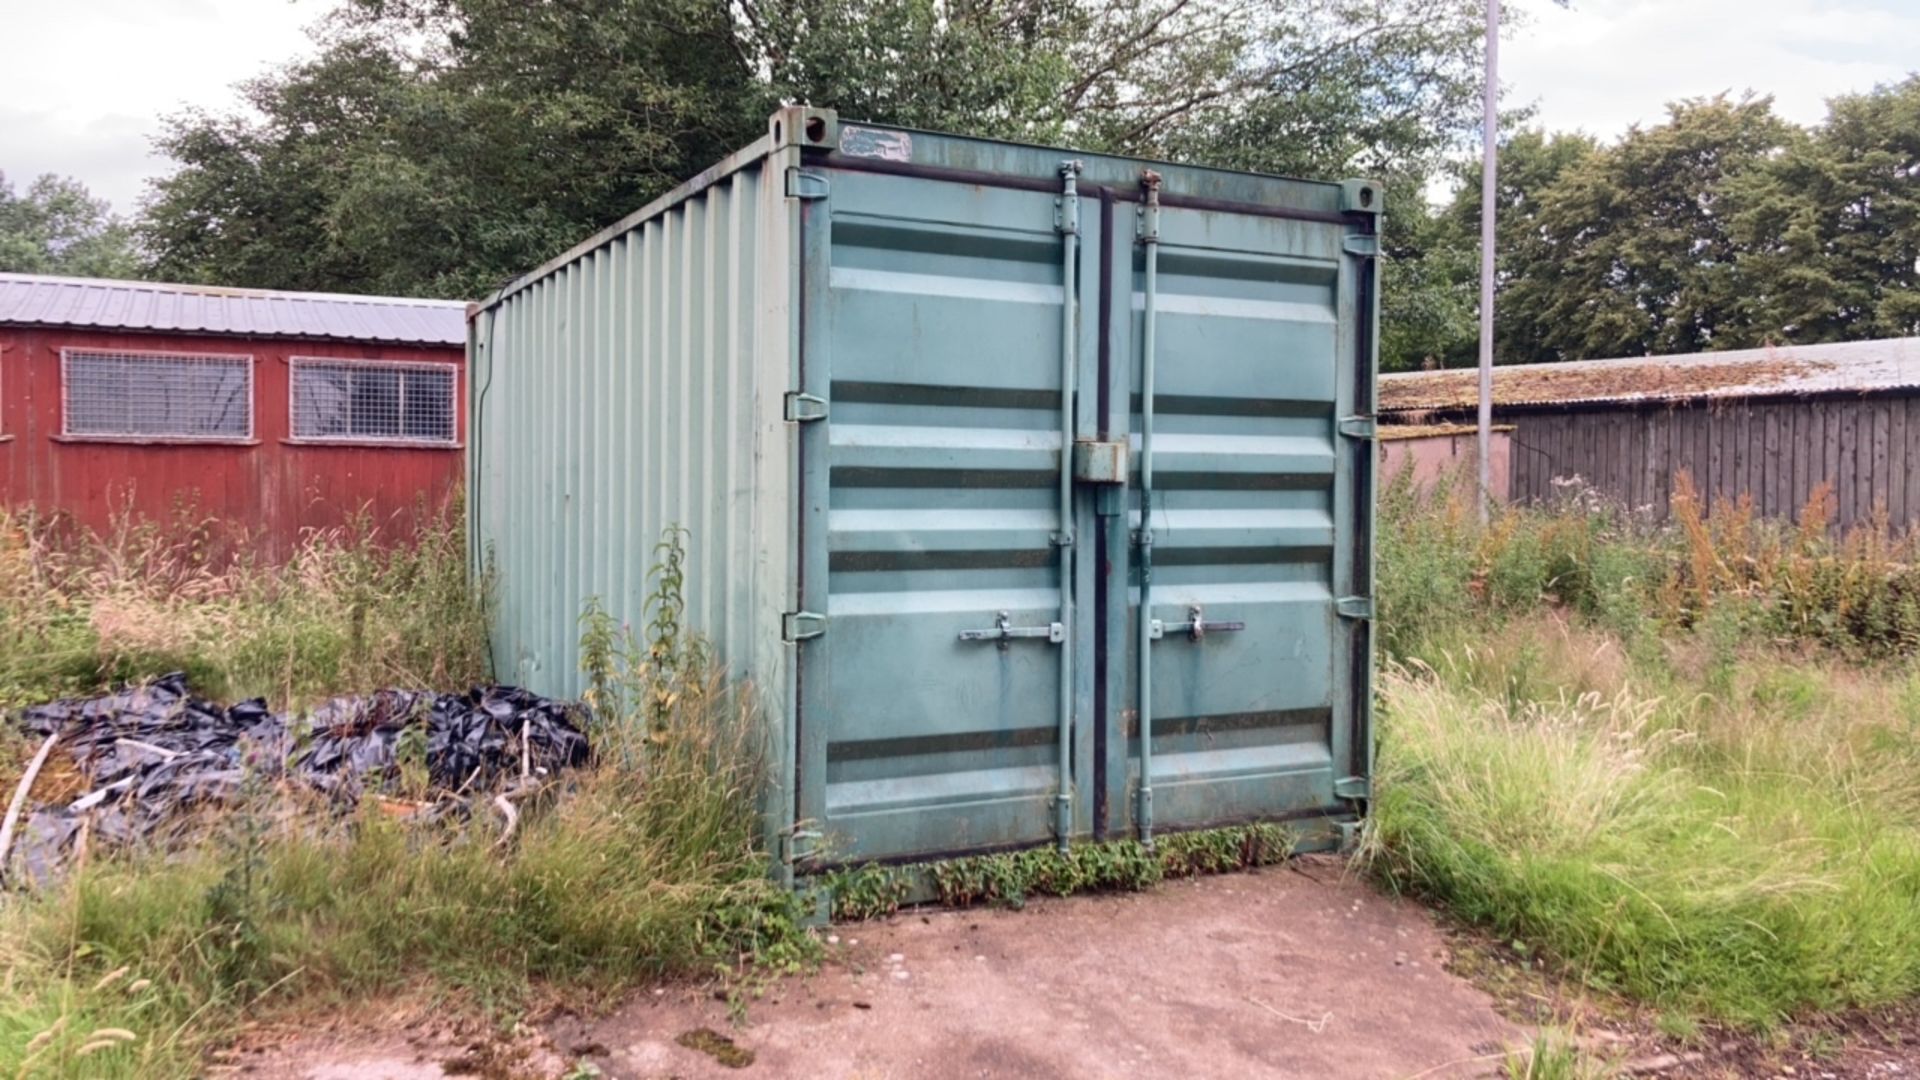 Shipping Container And Sports Equipment - Image 14 of 14